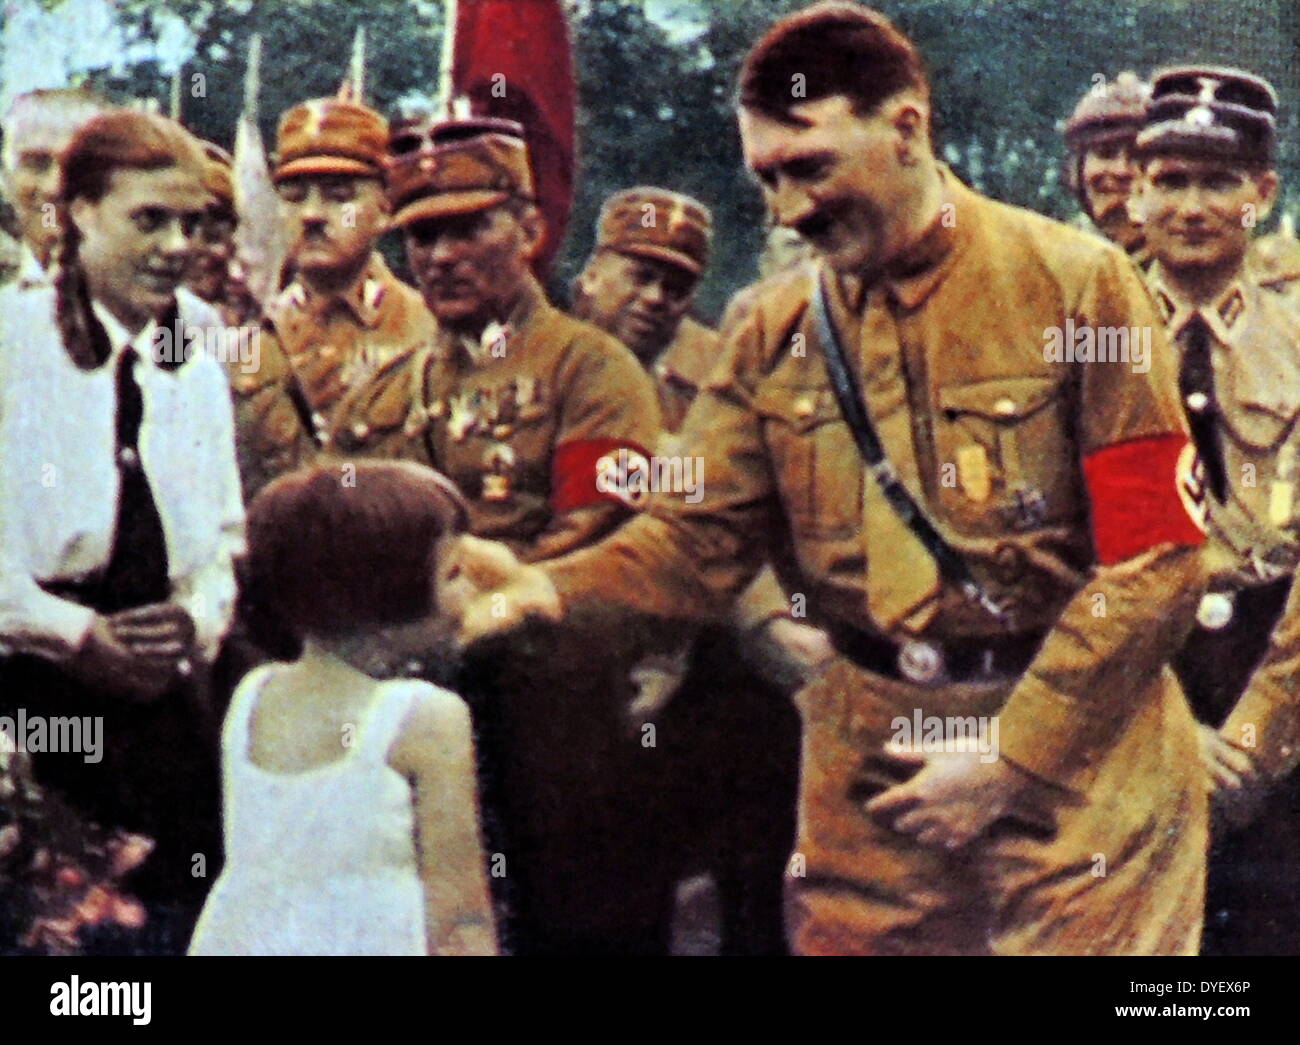 Hitler with adoring supporters. These photographs were taken to enhance the father of the nation status of Adolf Hitler after he became Chancellor of Germany in 1933.Rudolf Hess the Deputy Fuhrer is shown on theright. Stock Photo